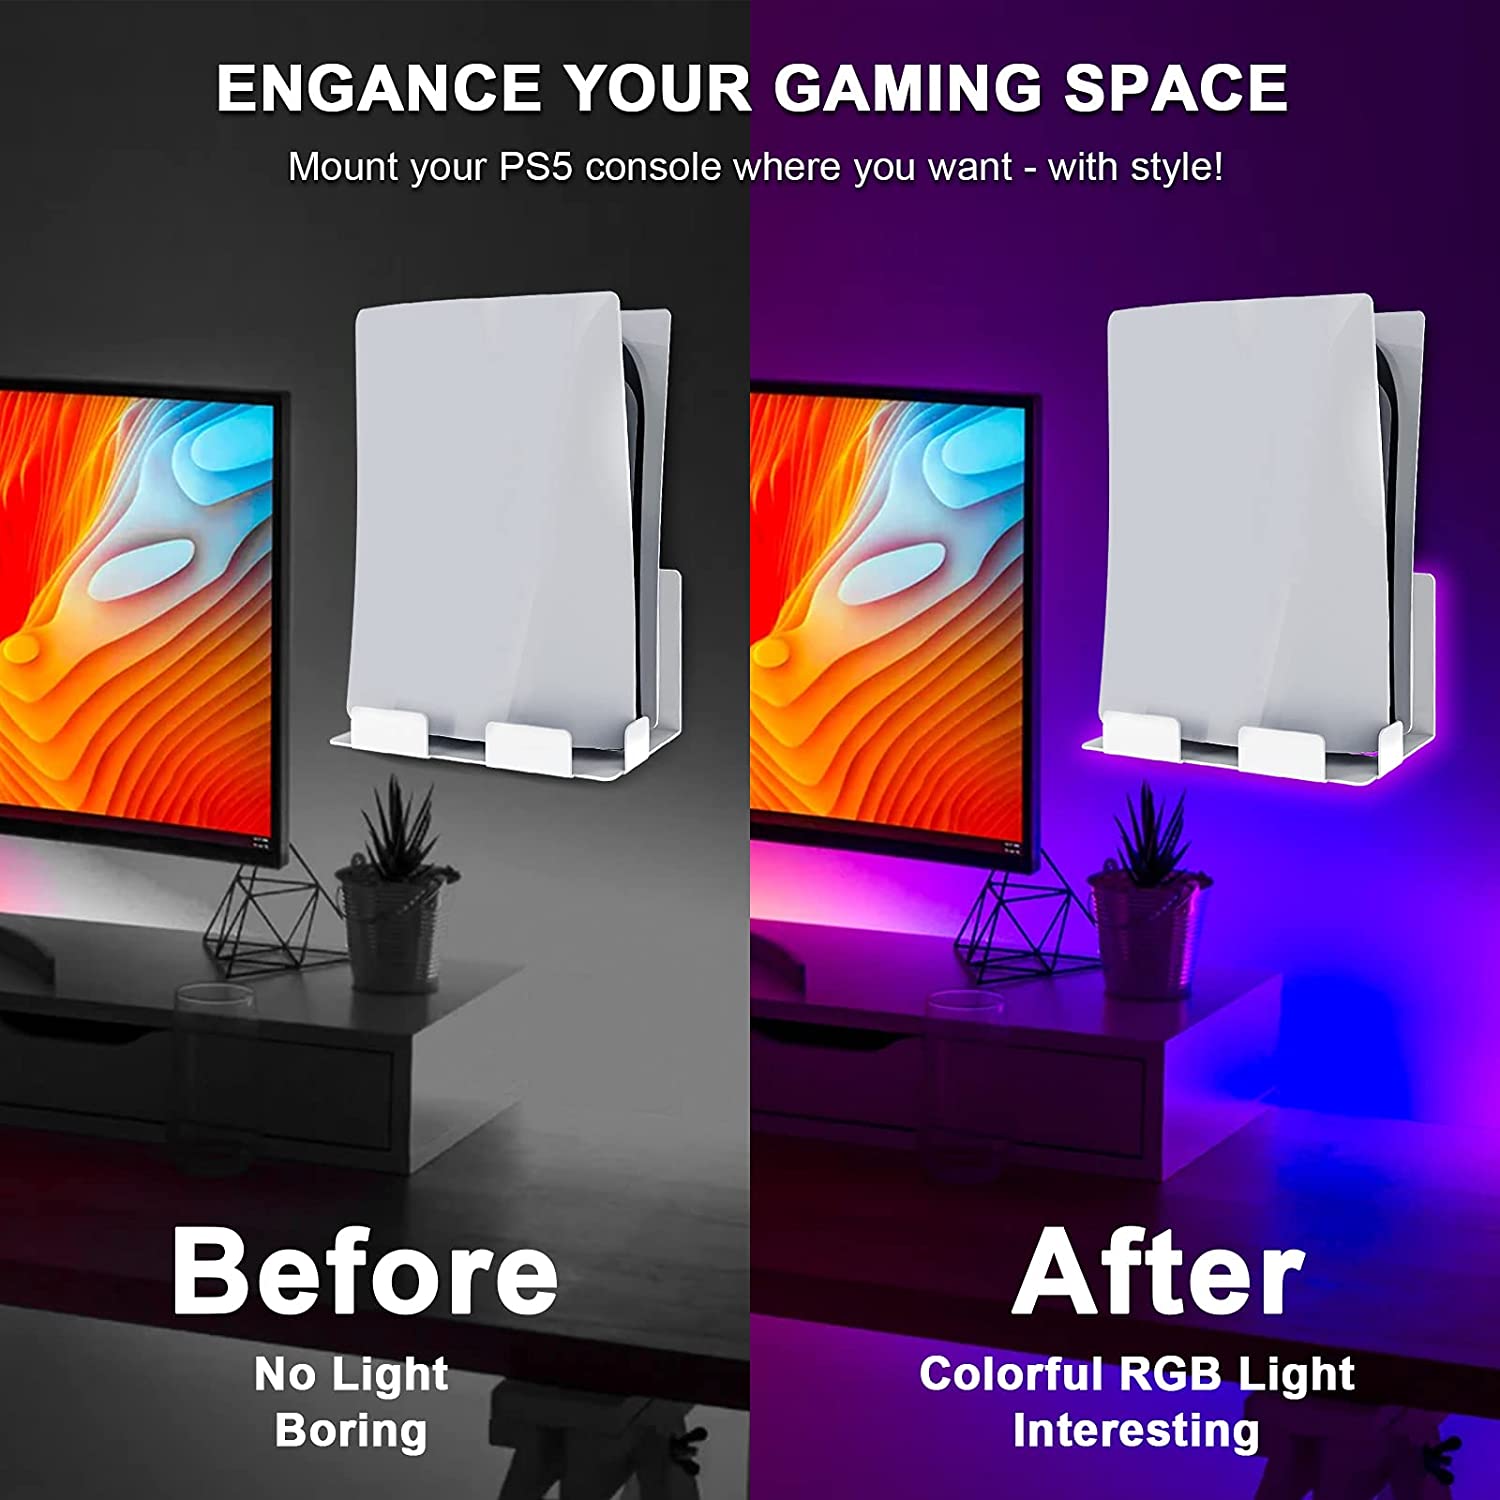 Enhance the ambiance of your gaming space by mounting your PS5 console where you want it in style!